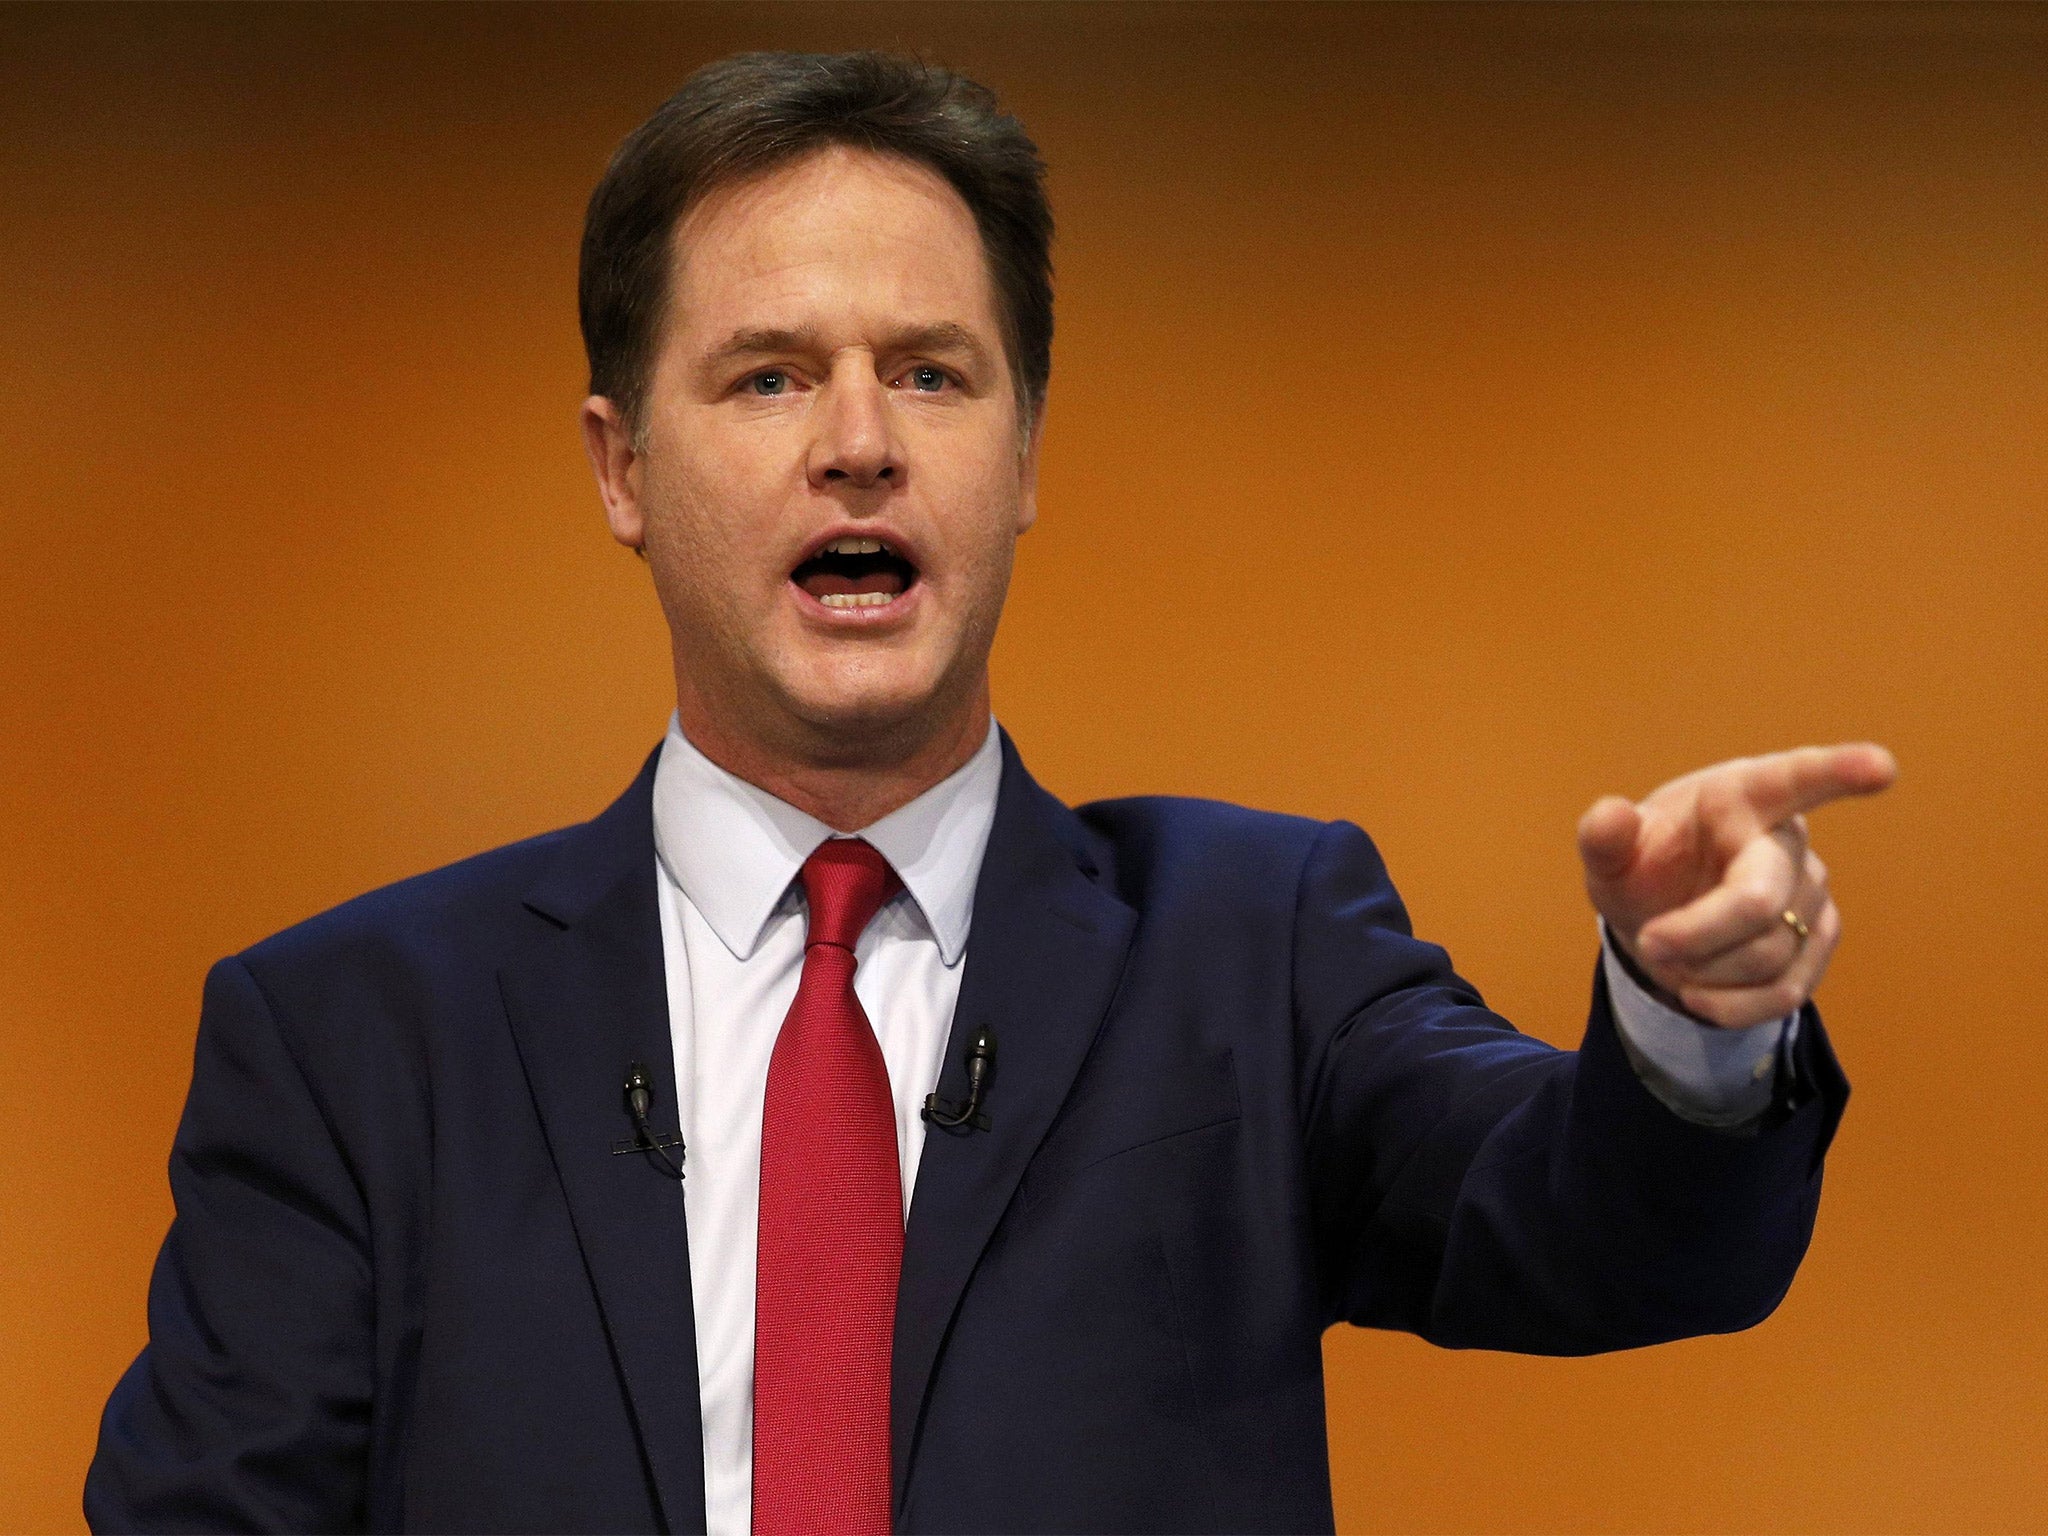 Nick Clegg delivers his keynote speech